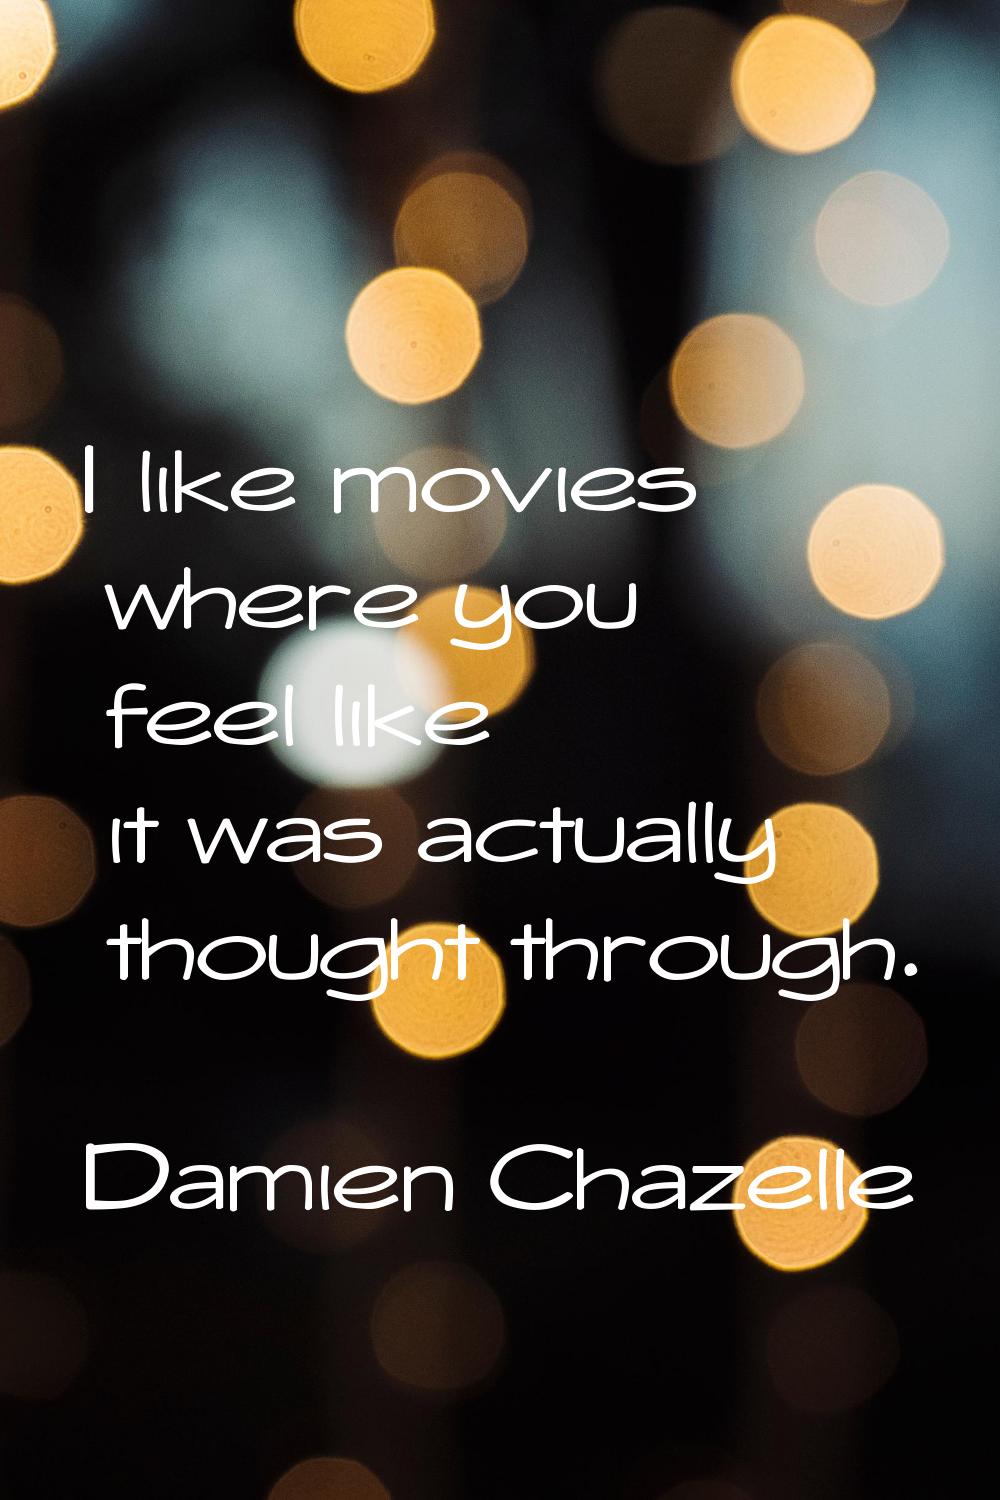 I like movies where you feel like it was actually thought through.